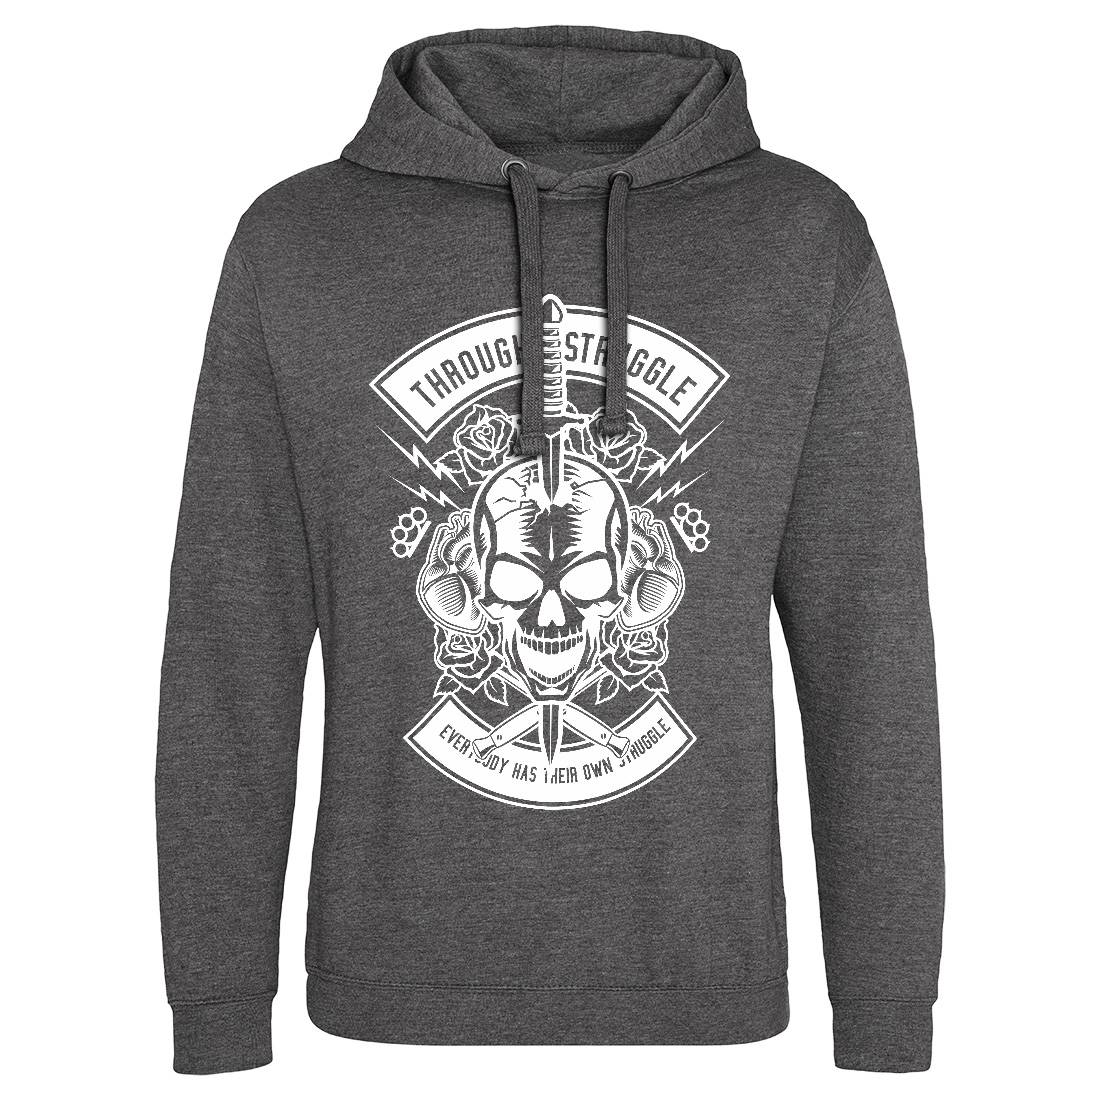 Through Struggle Mens Hoodie Without Pocket American B655